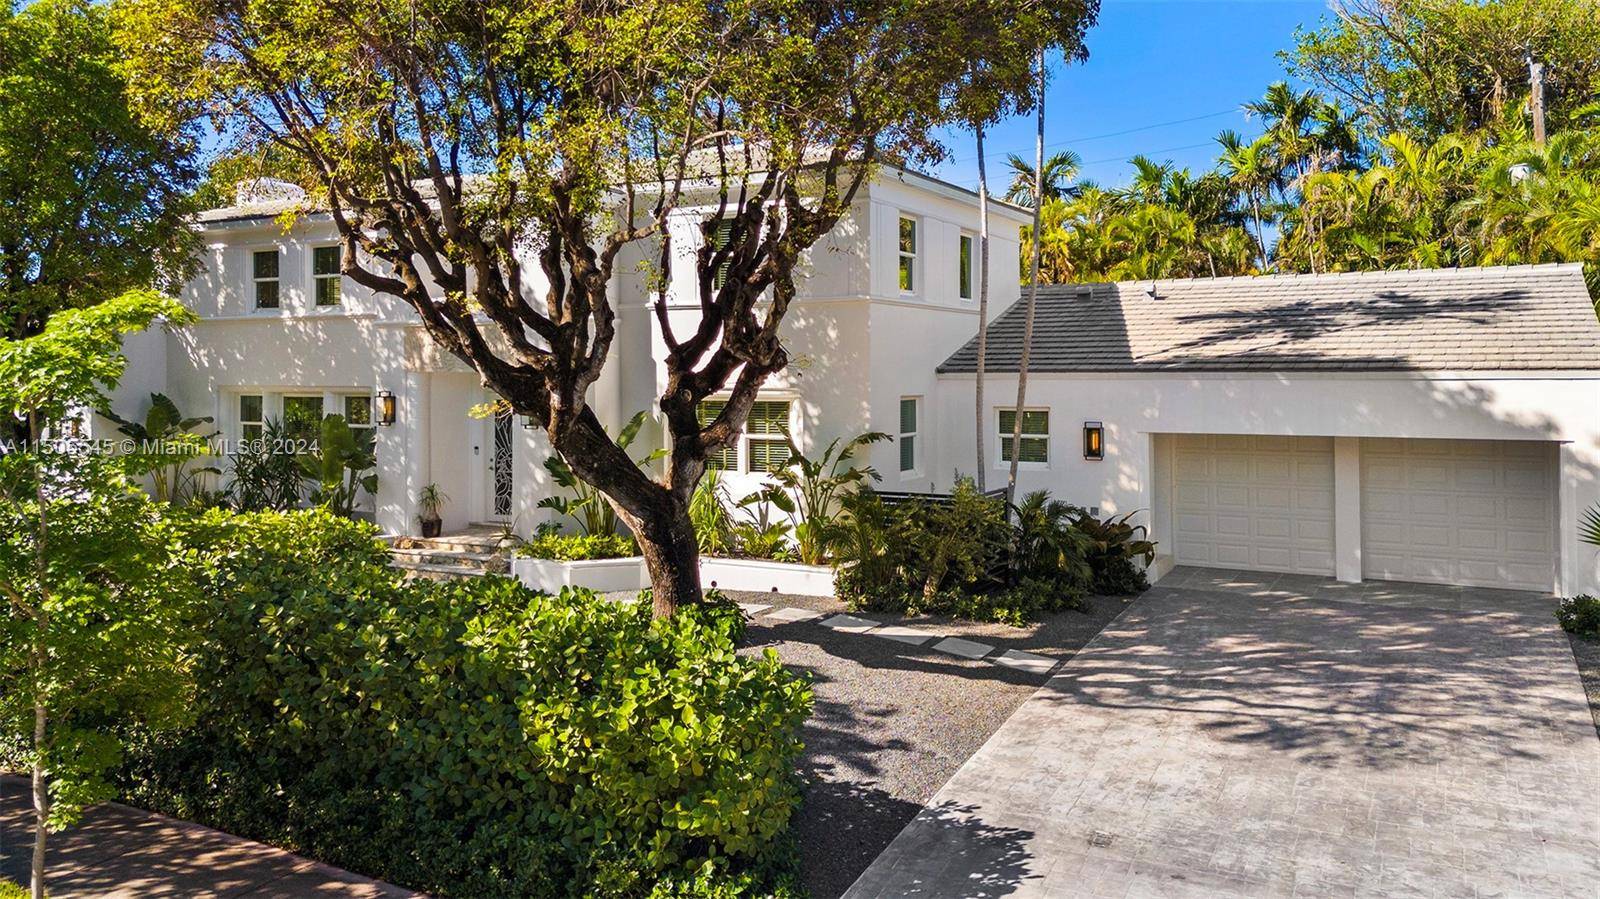 Walk to the ocean from this magnificent estate on tranquil Flamingo Drive.